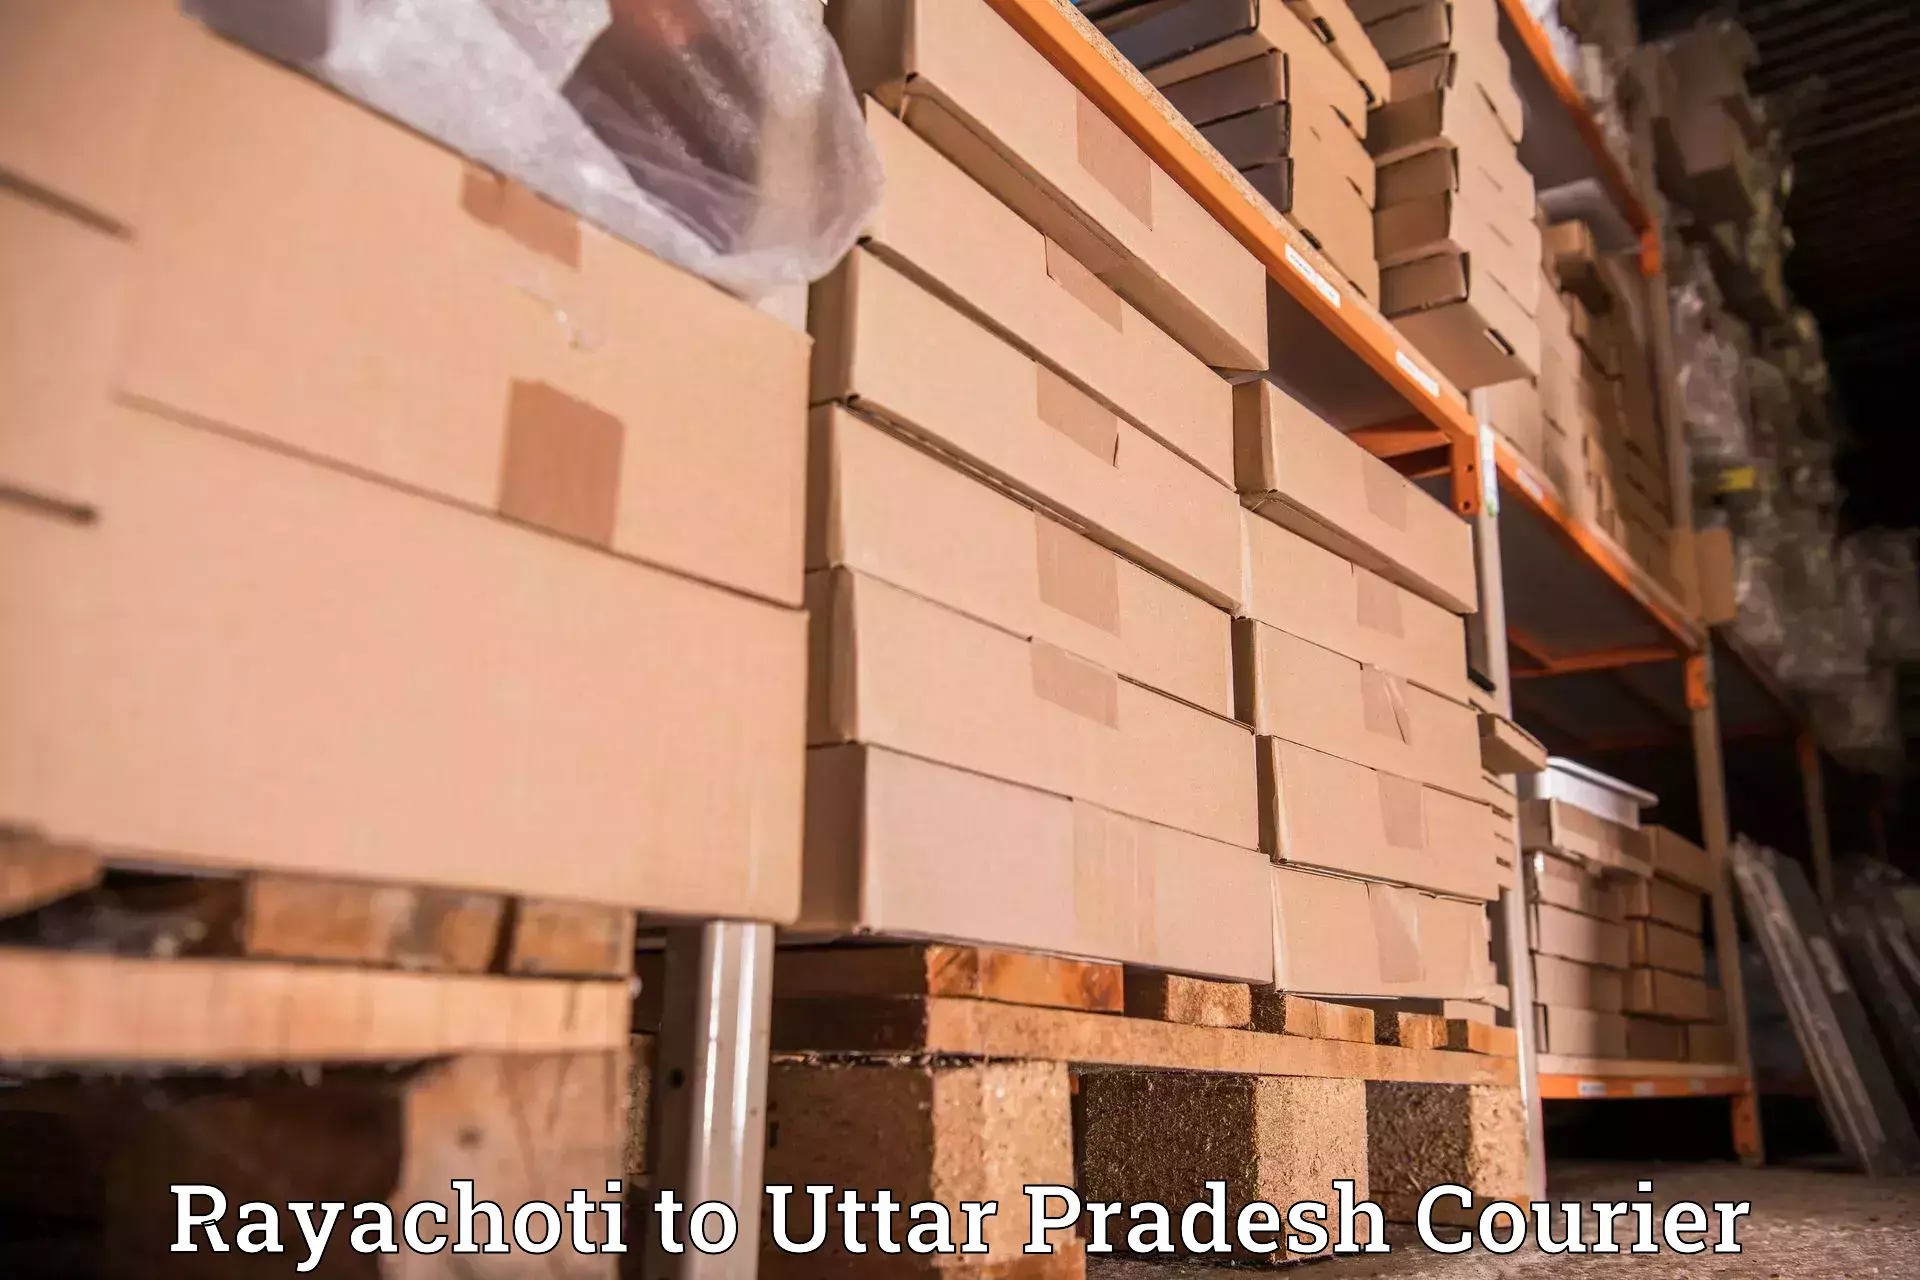 Courier dispatch services in Rayachoti to Allahabad